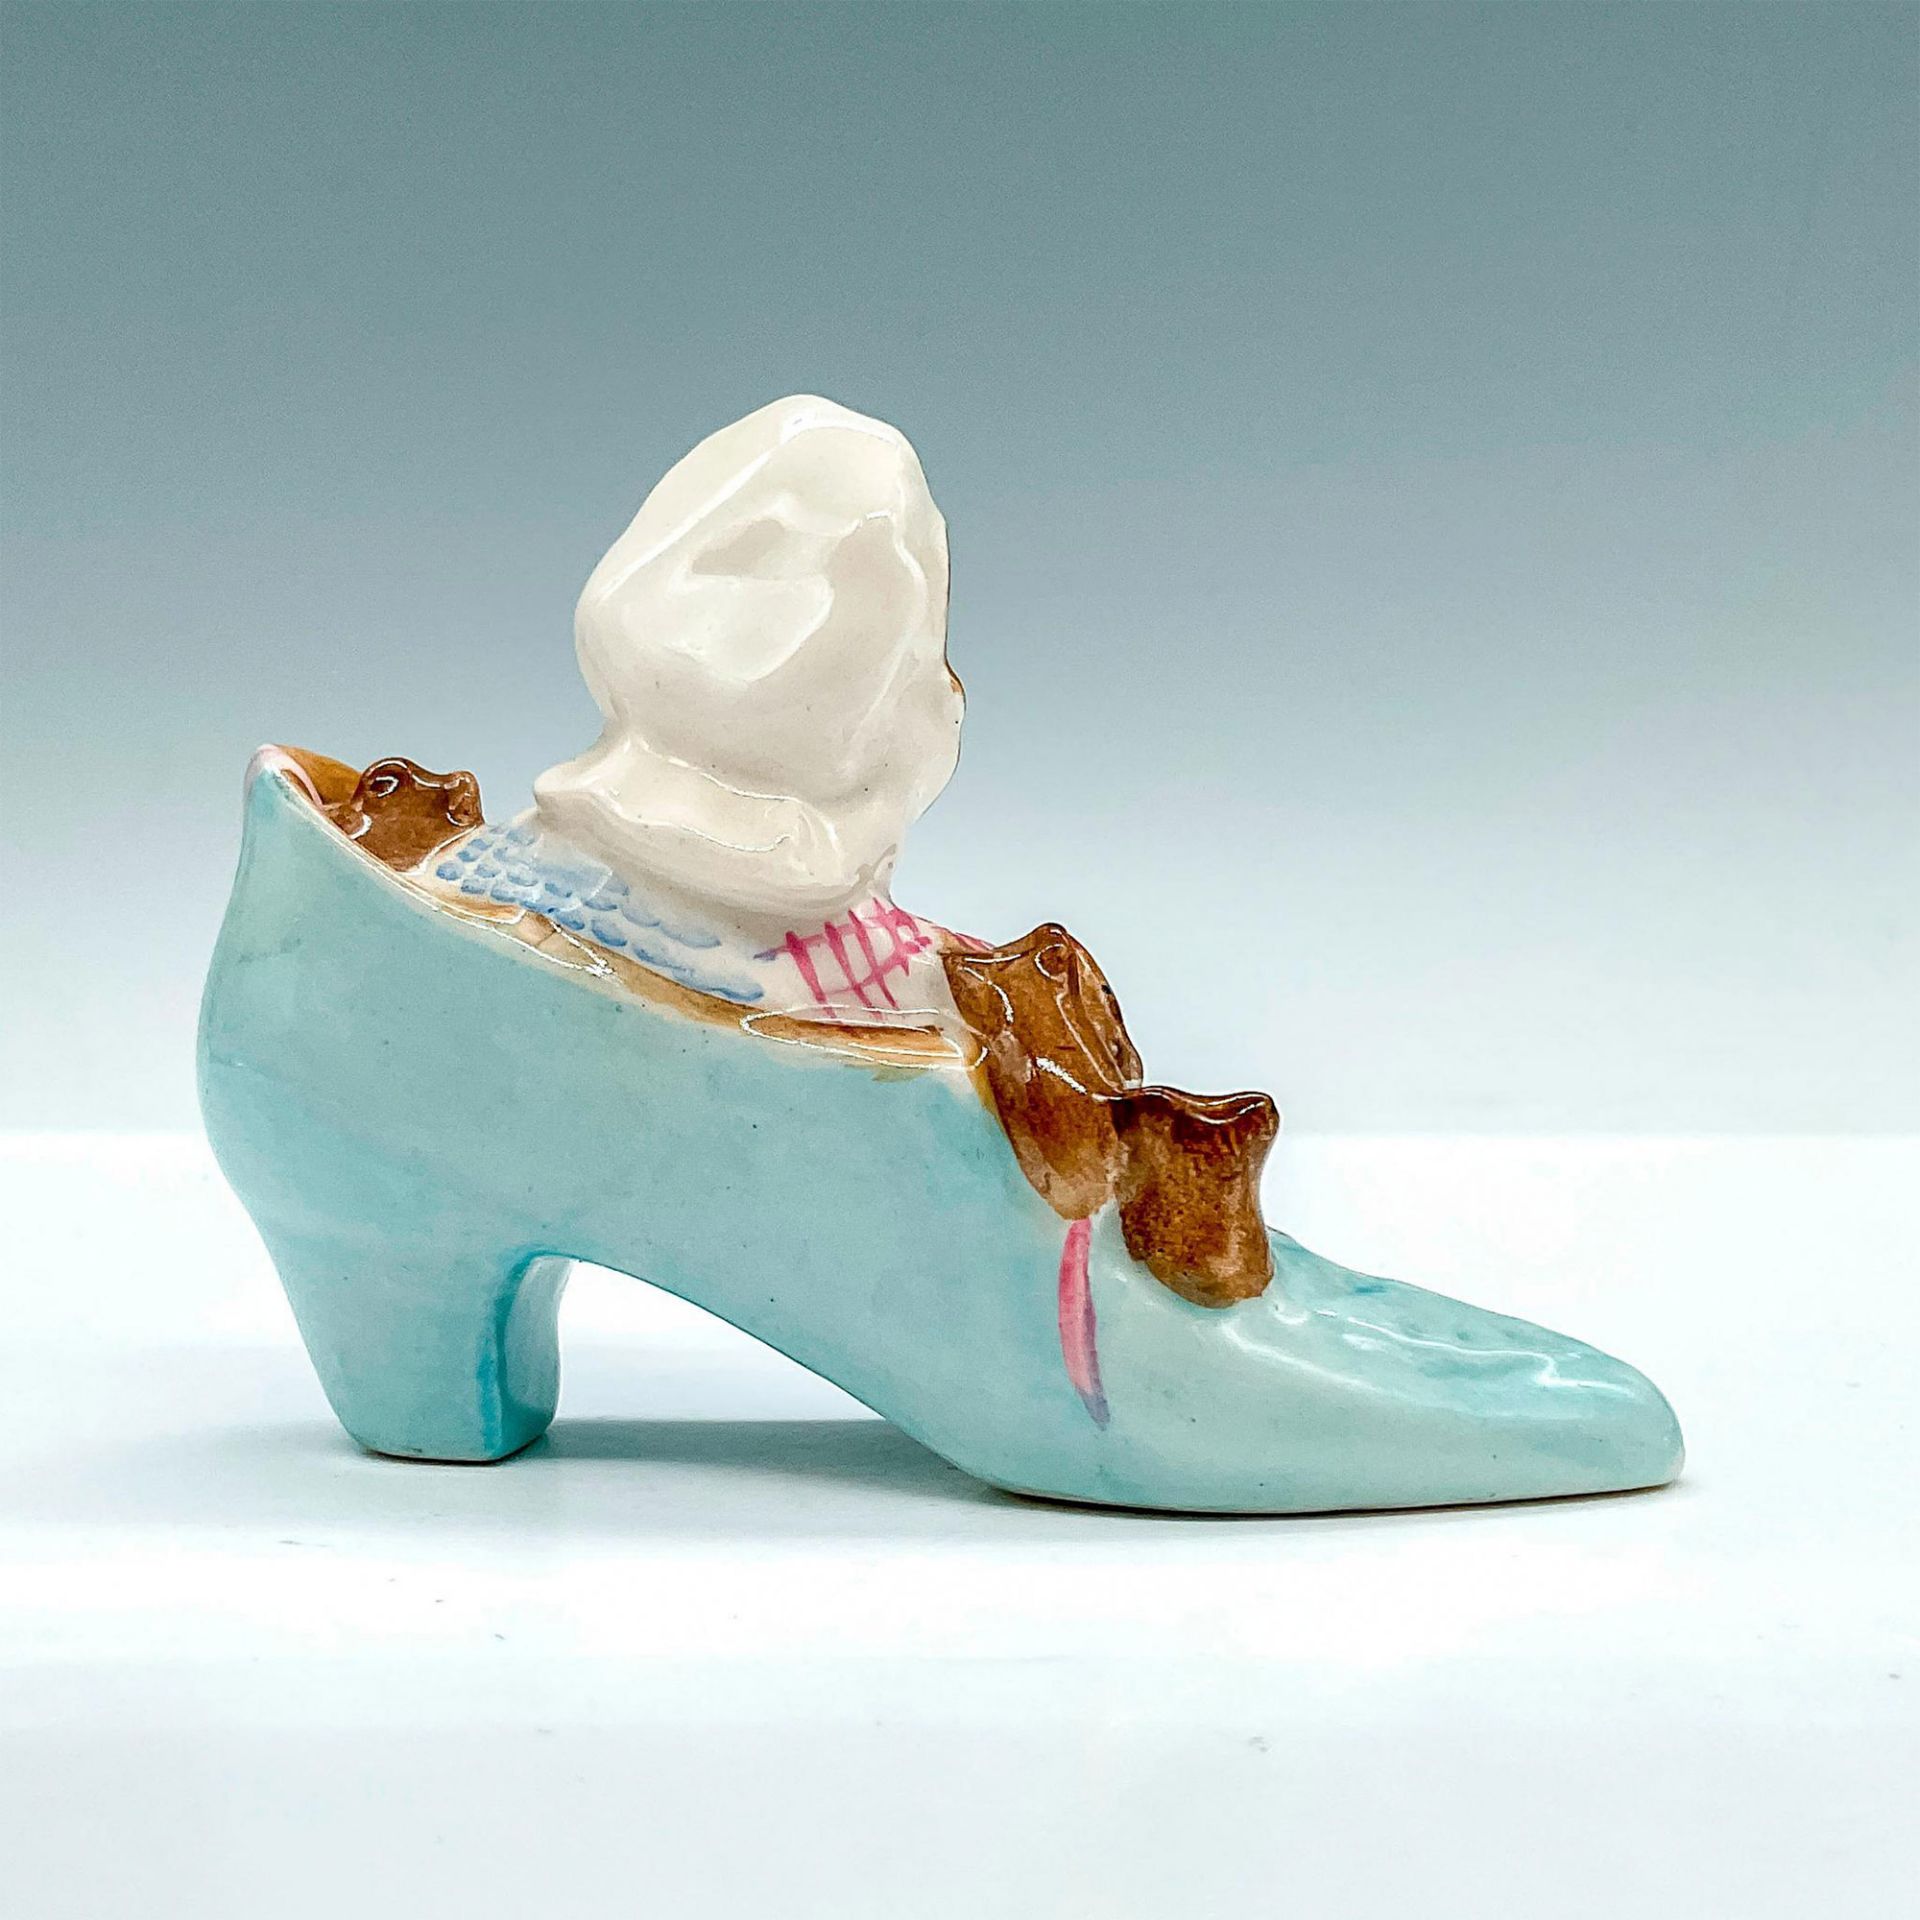 Beswick Figurine, The Old Woman who lived in a Shoe - Image 2 of 3